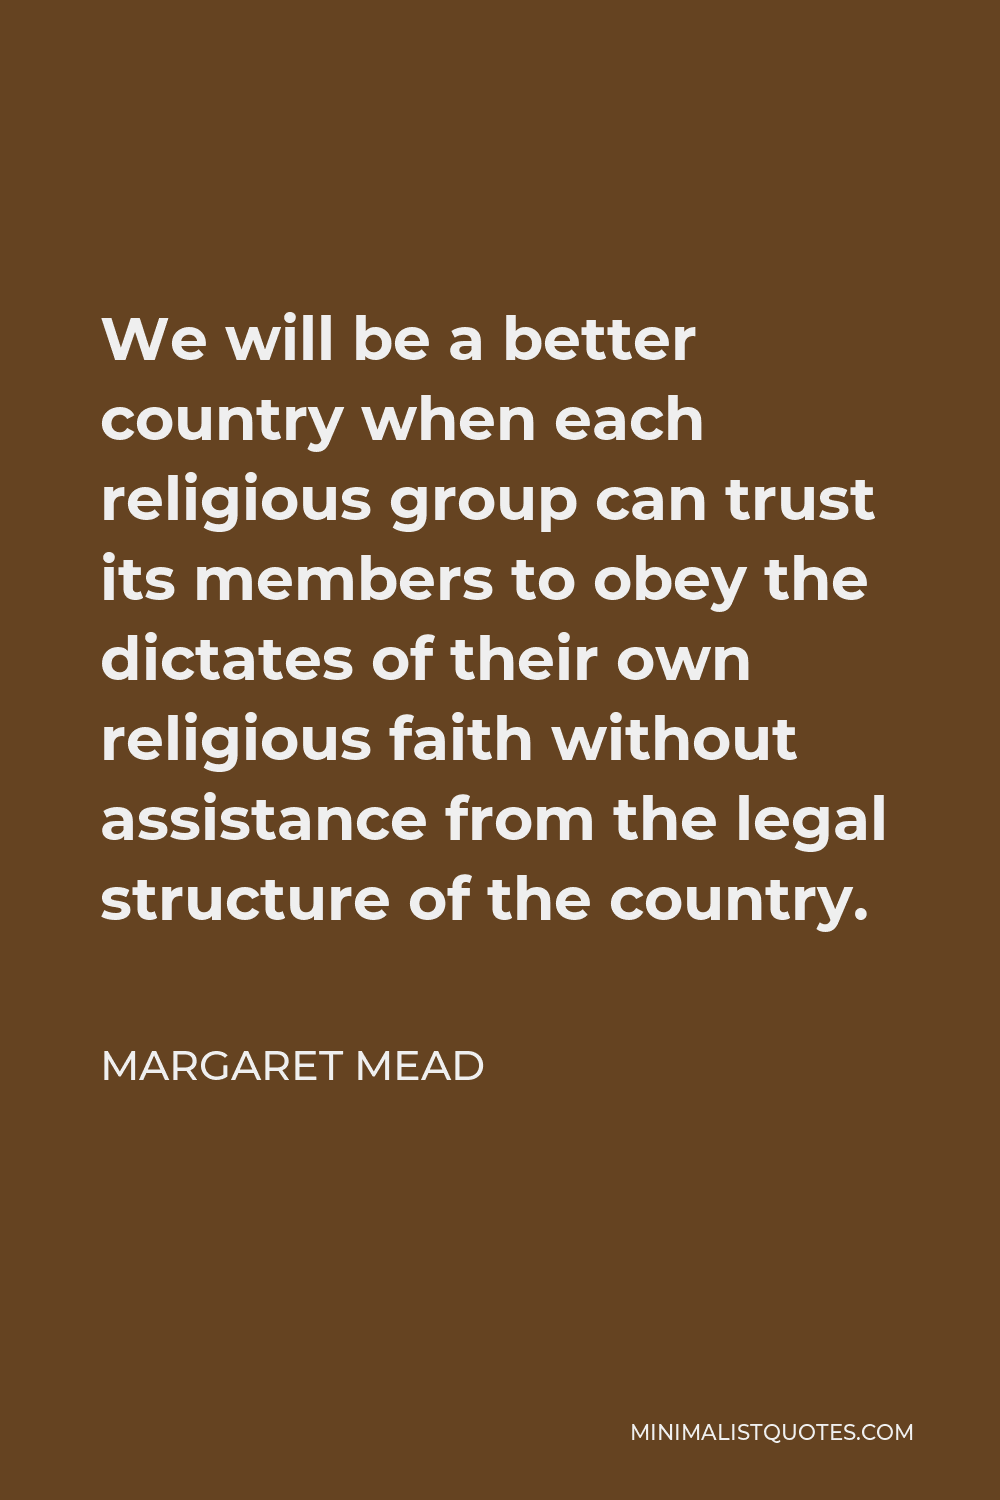 Margaret Mead Quote - We will be a better country when each religious group can trust its members to obey the dictates of their own religious faith without assistance from the legal structure of the country.